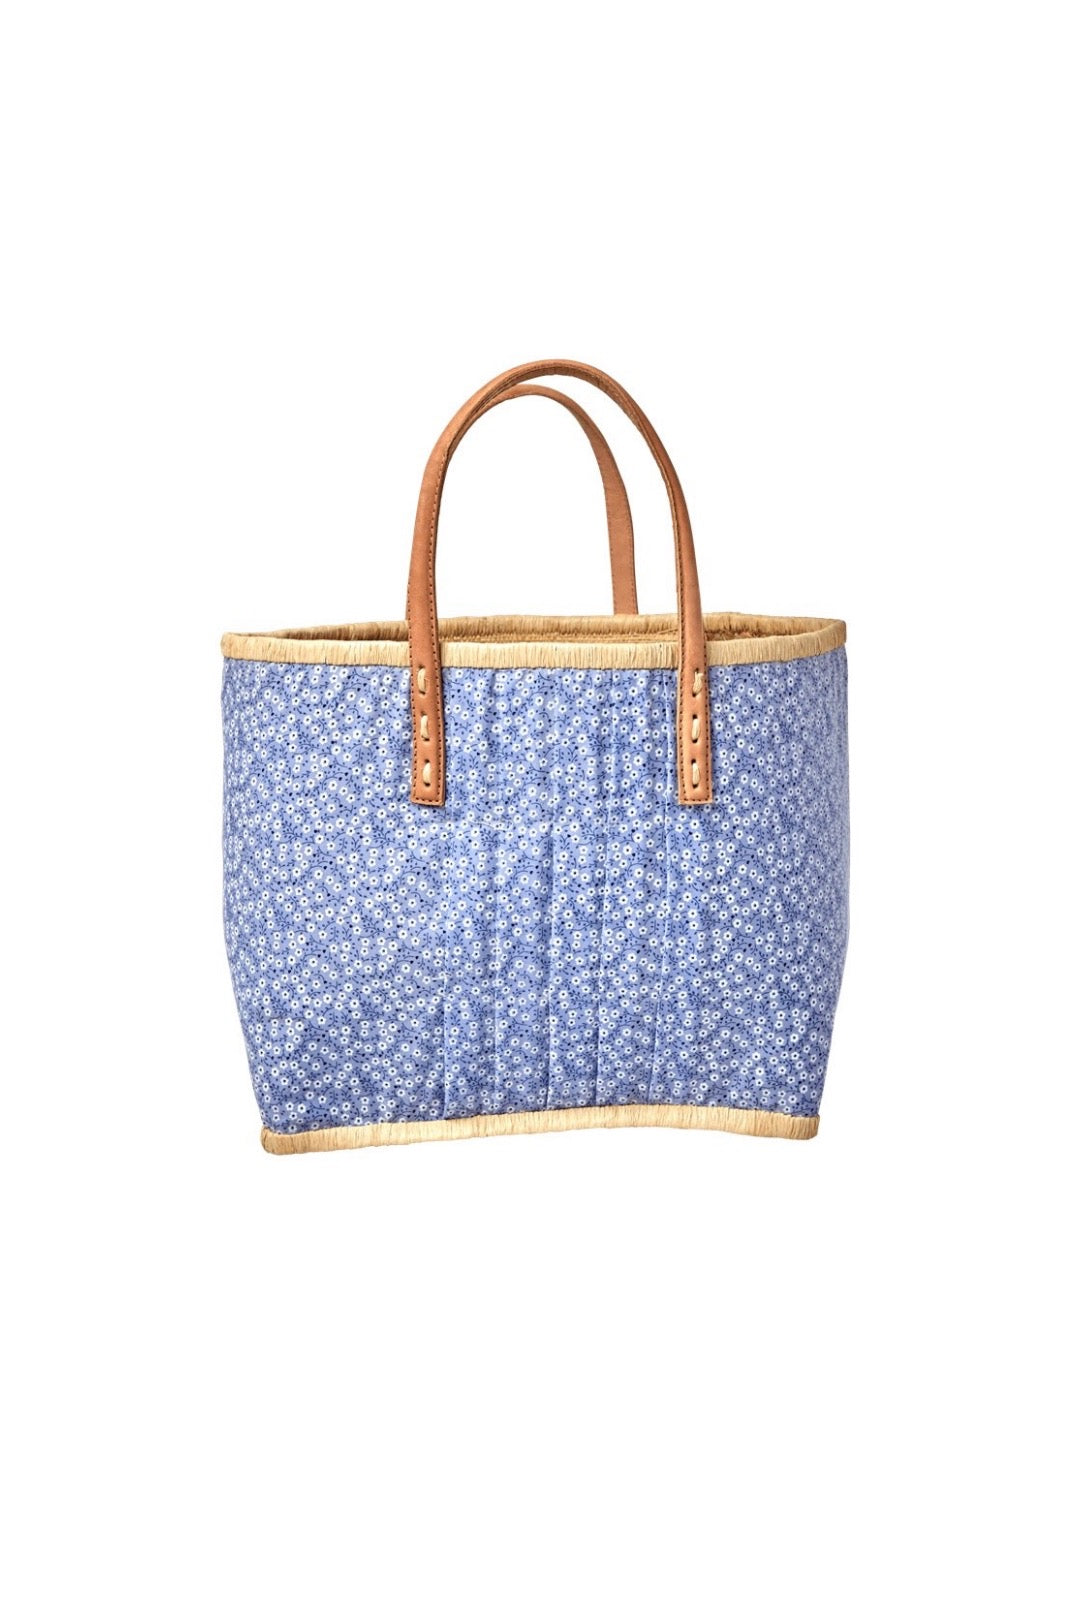 Blue Floral Fabric Cover Medium Raffia Bag With Leather Handle